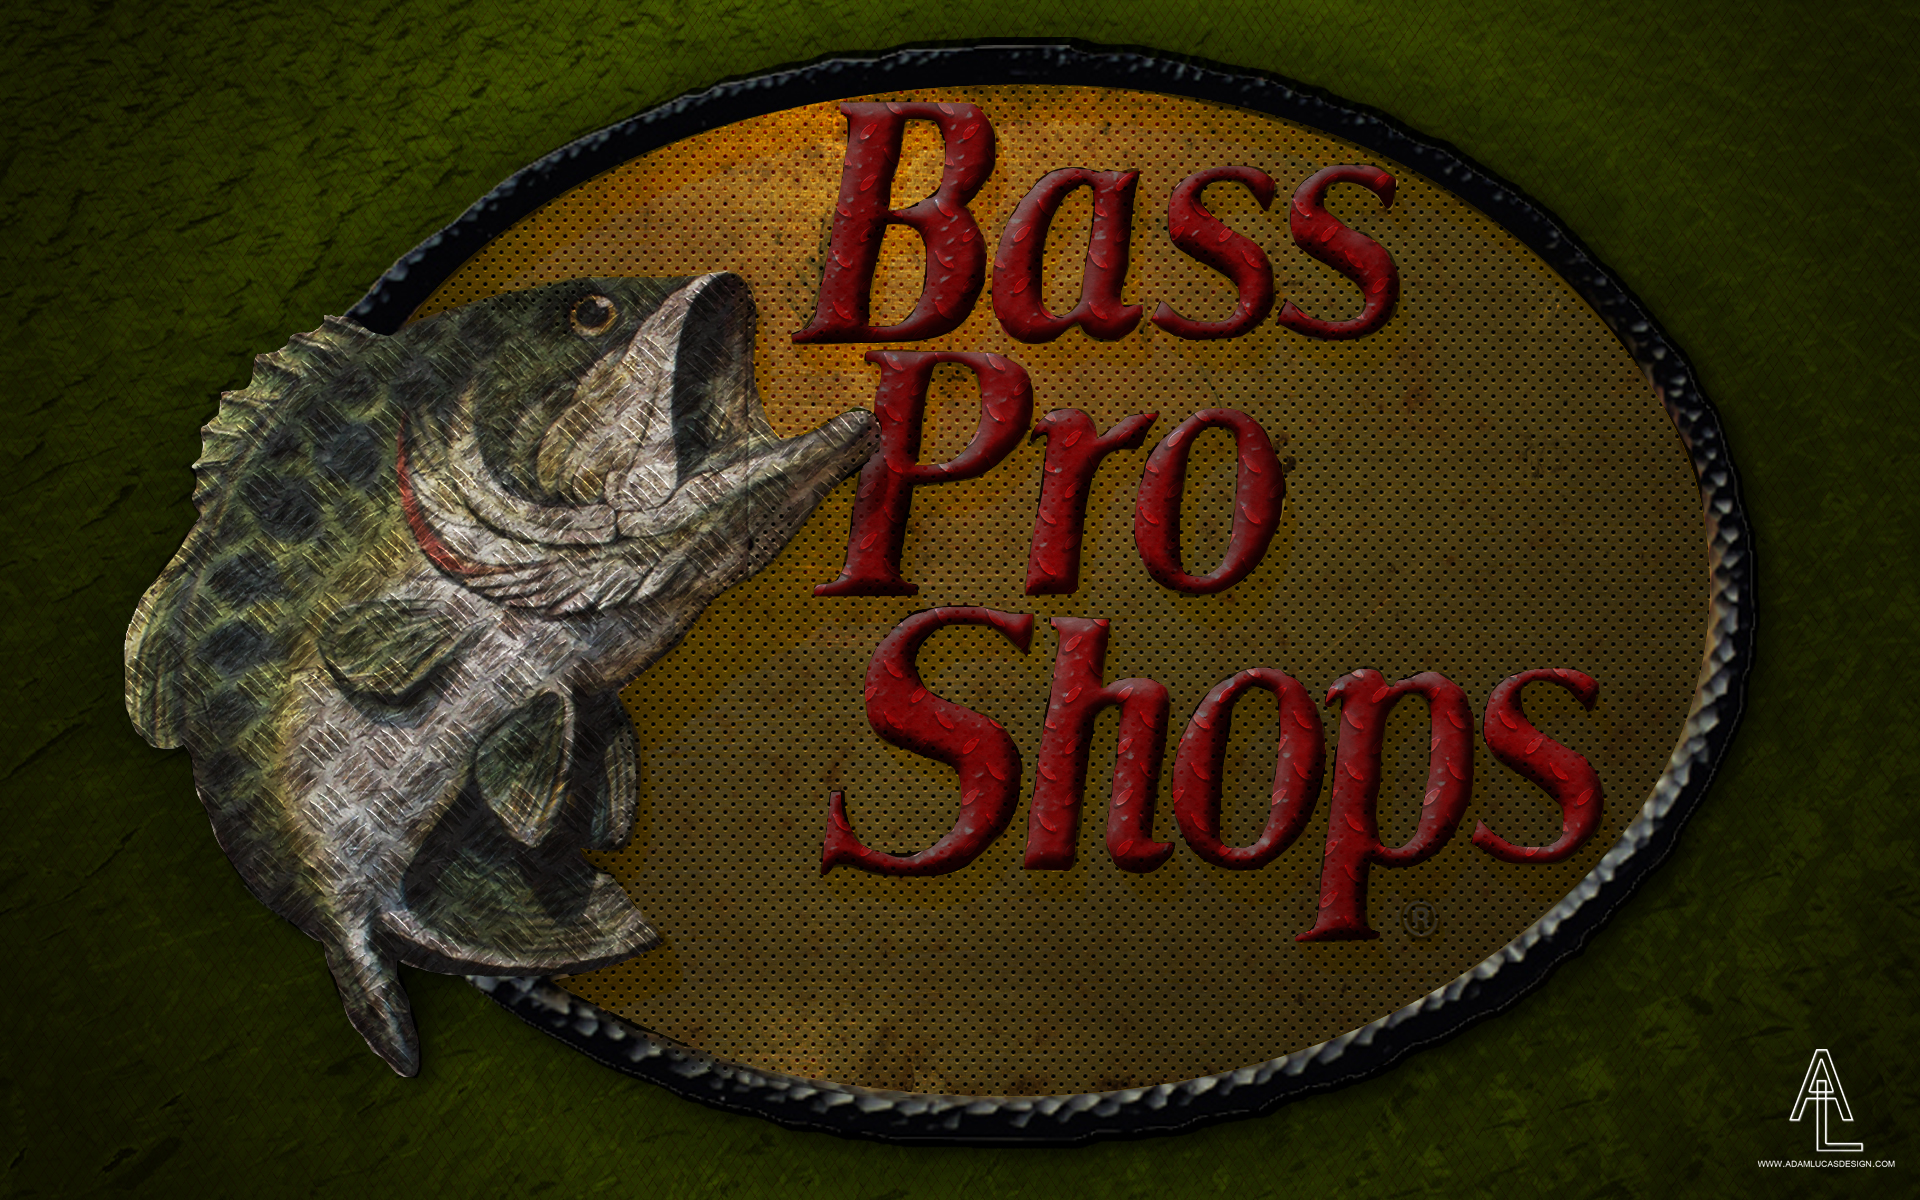 Free Download Bass Pro Shops Logo Wallpaper 1920x1200 For Your